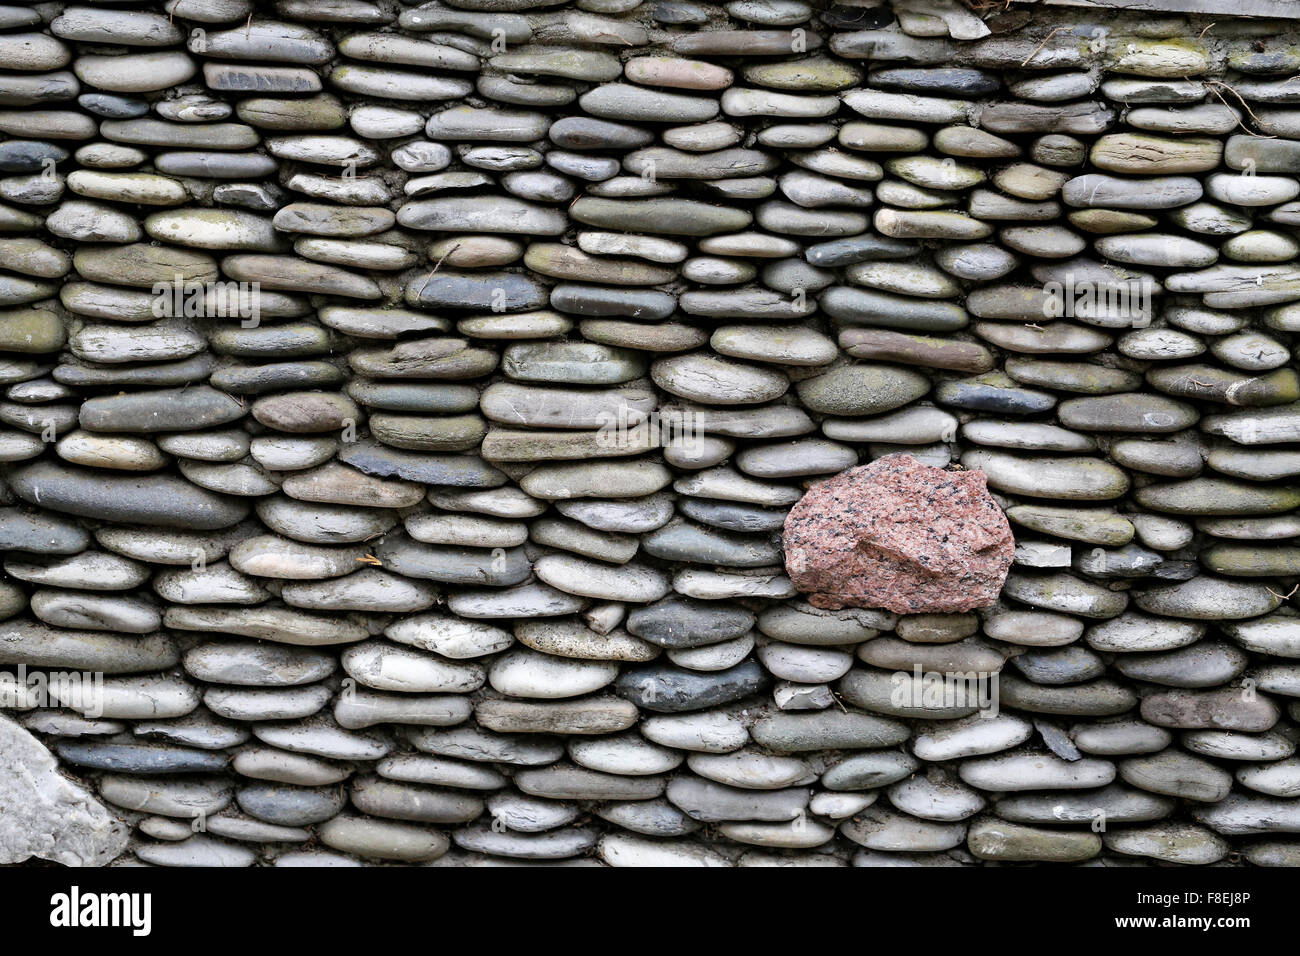 A wall of flat stones photographed close up Stock Photo